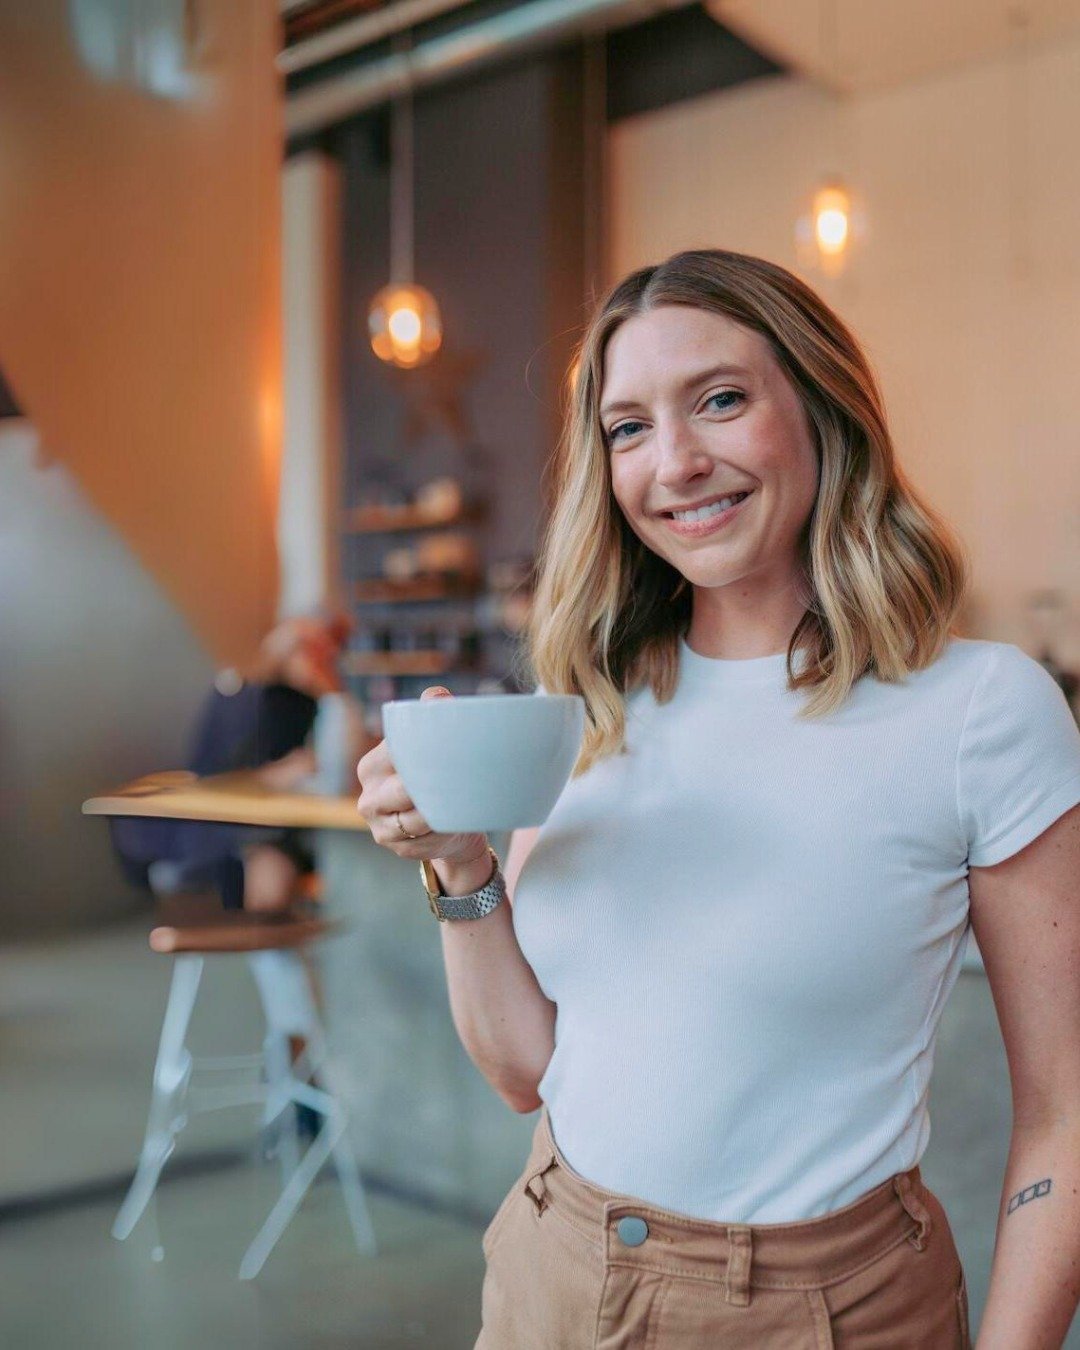 Hi! 👋 I'd like to reintroduce myself&mdash;my name is Brooke. As a marketing strategist, I am passionate about helping business owners grow their brands by creating comprehensive sales funnels designed to attract, convert, and retain their ideal cli